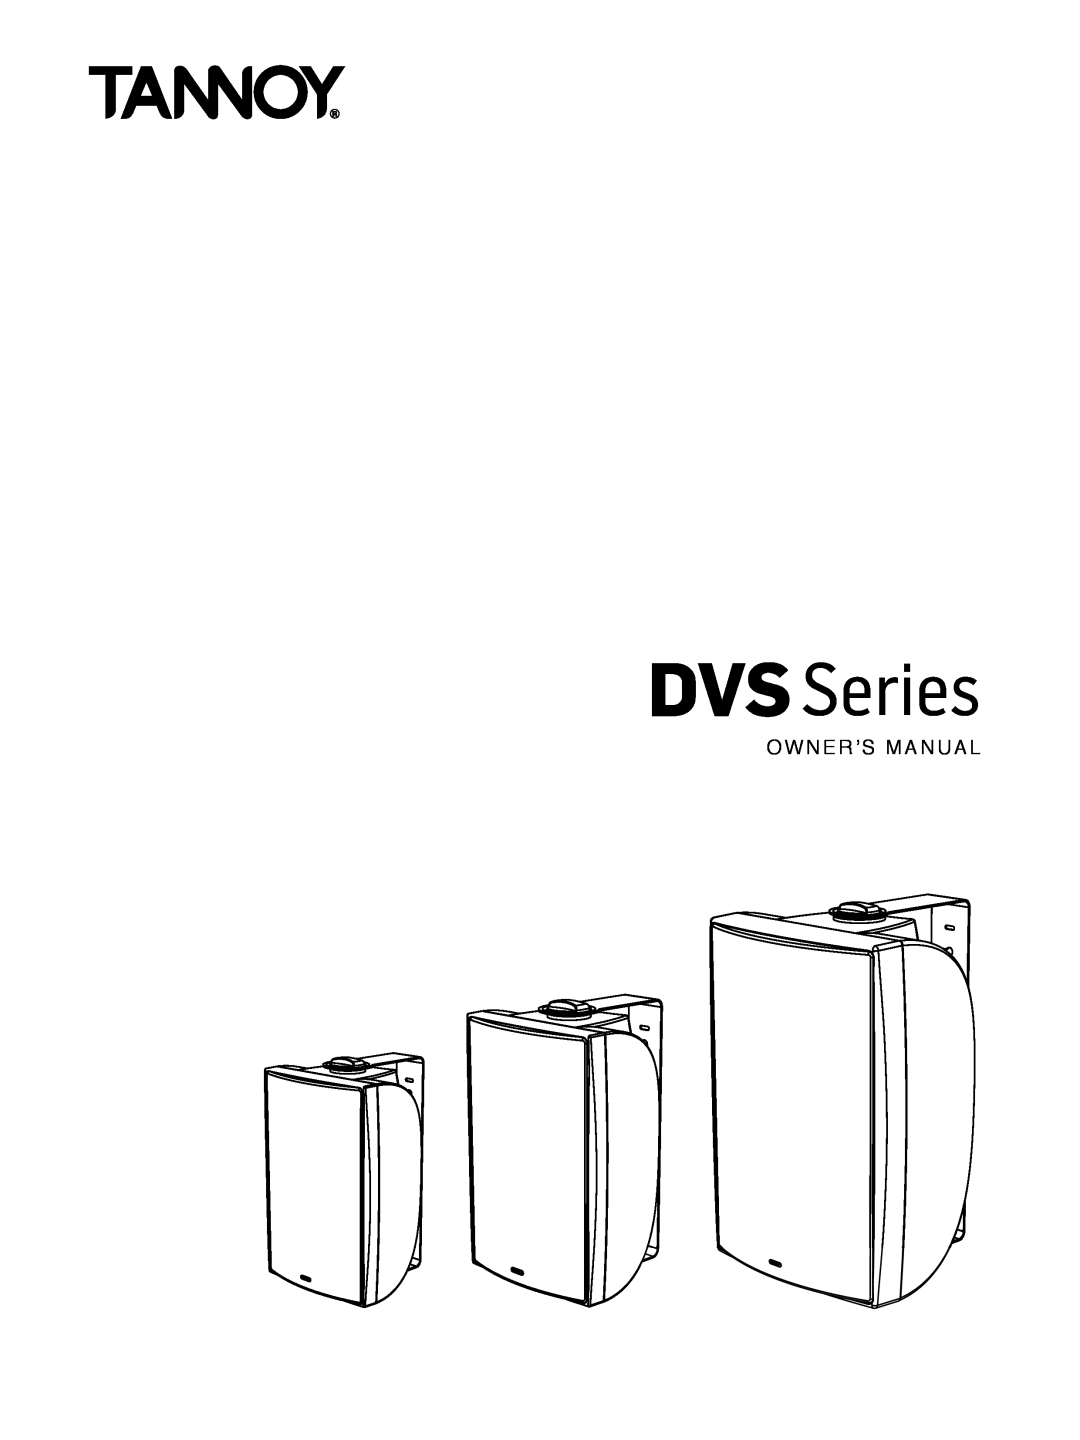 Tannoy DVS Series owner manual o w n e r’s manual 